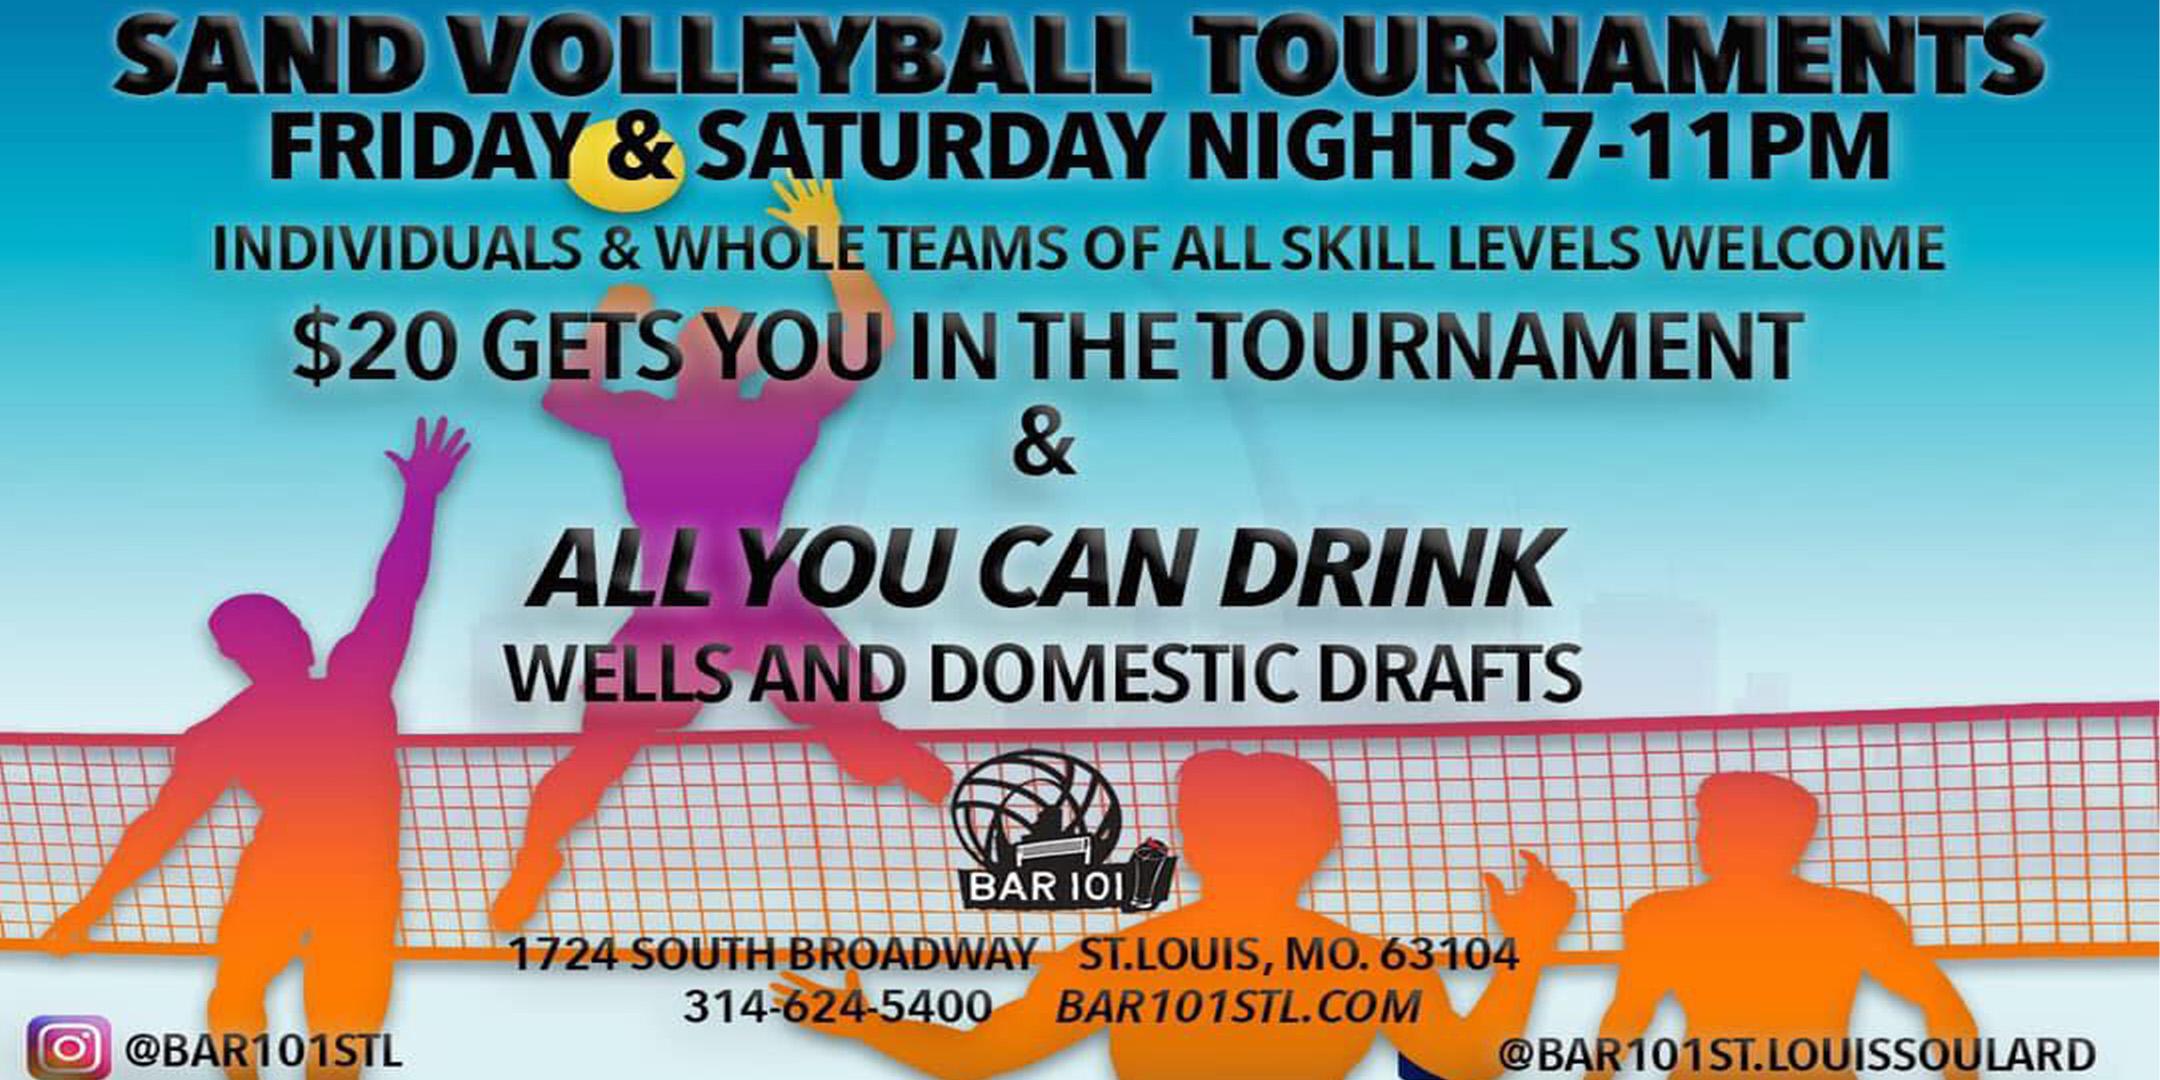 Weekend Sand Volleyball Tournaments at BAR 101